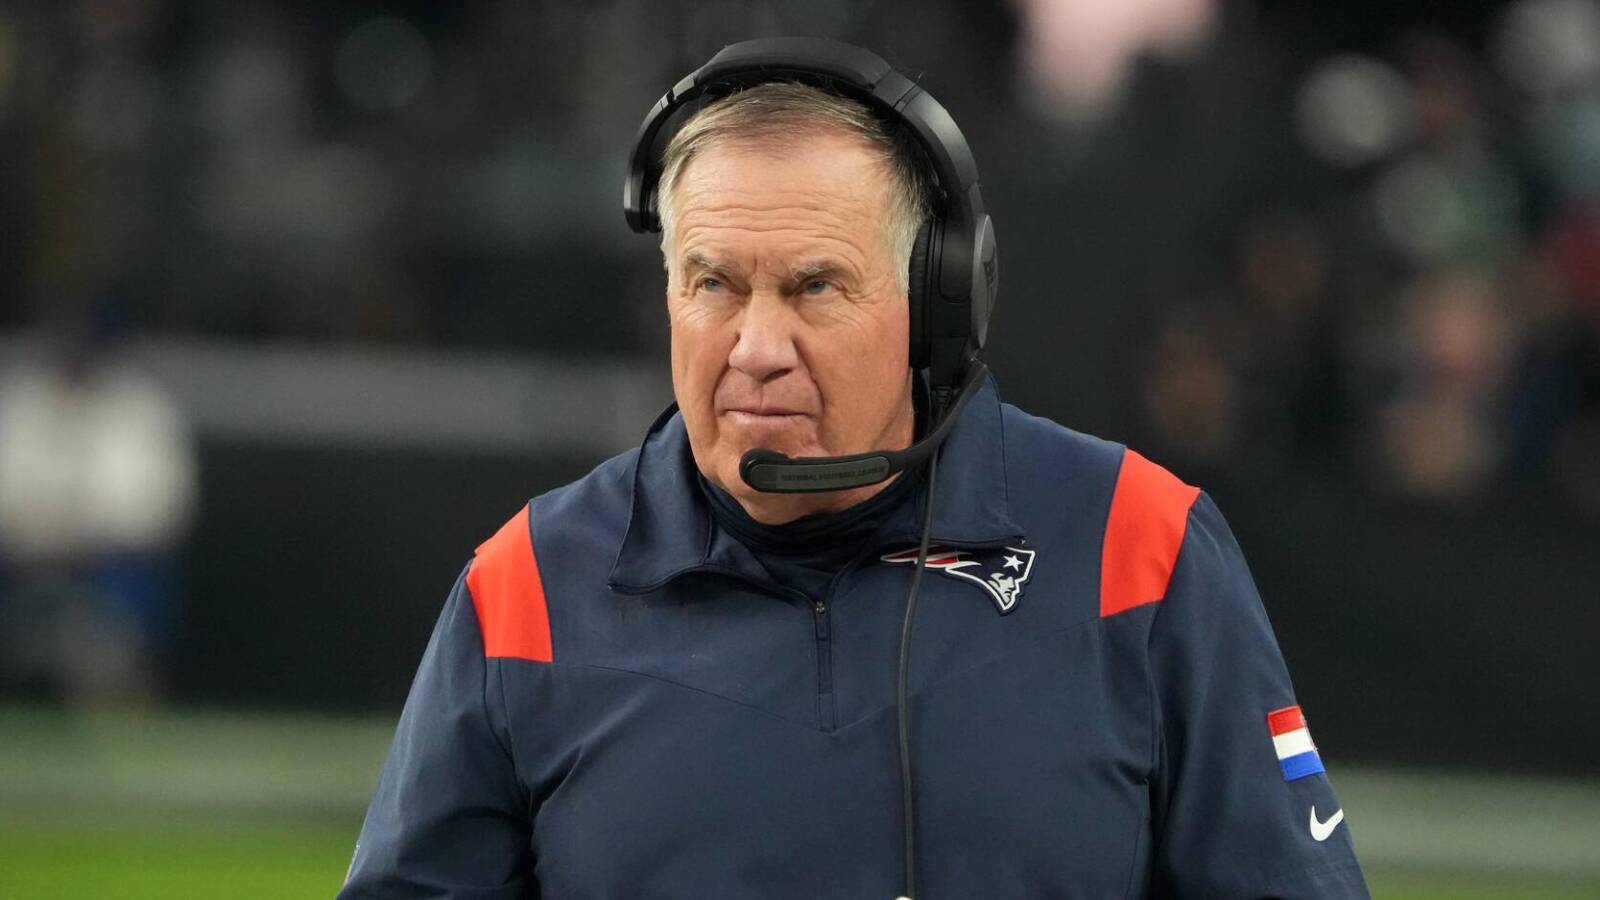 Did Bill Belichick reach out to Tom Brady after Super Bowl win with Buccaneers?